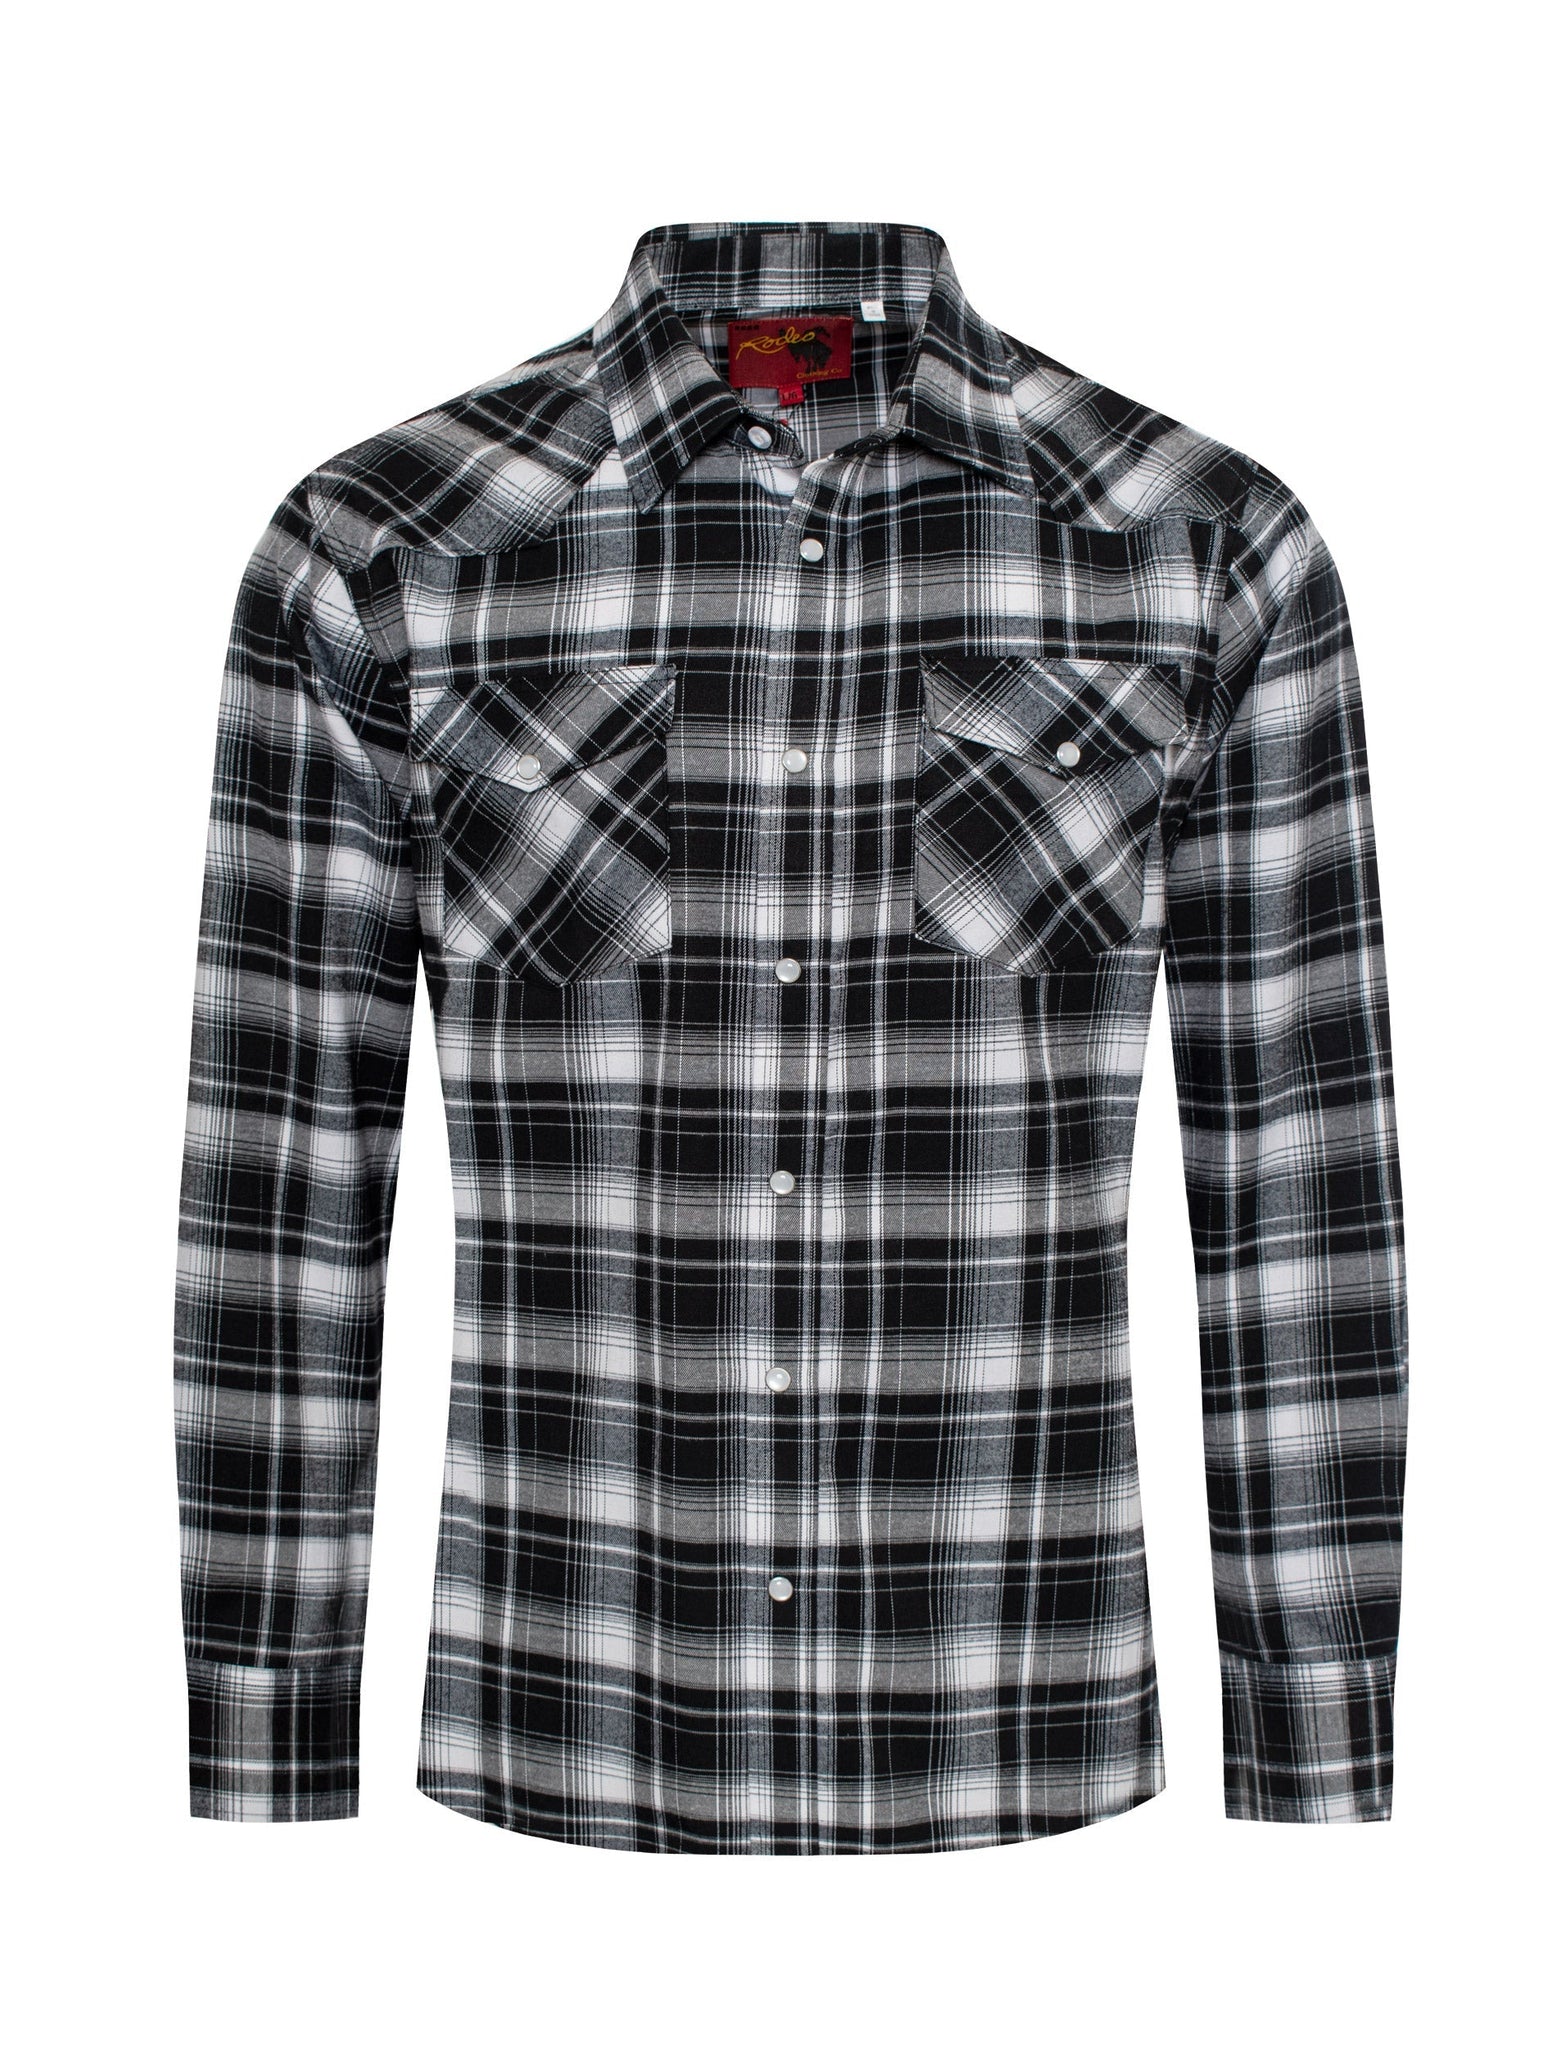 Men's Western Flannel Shirts With Snap Buttons-FLS300-301